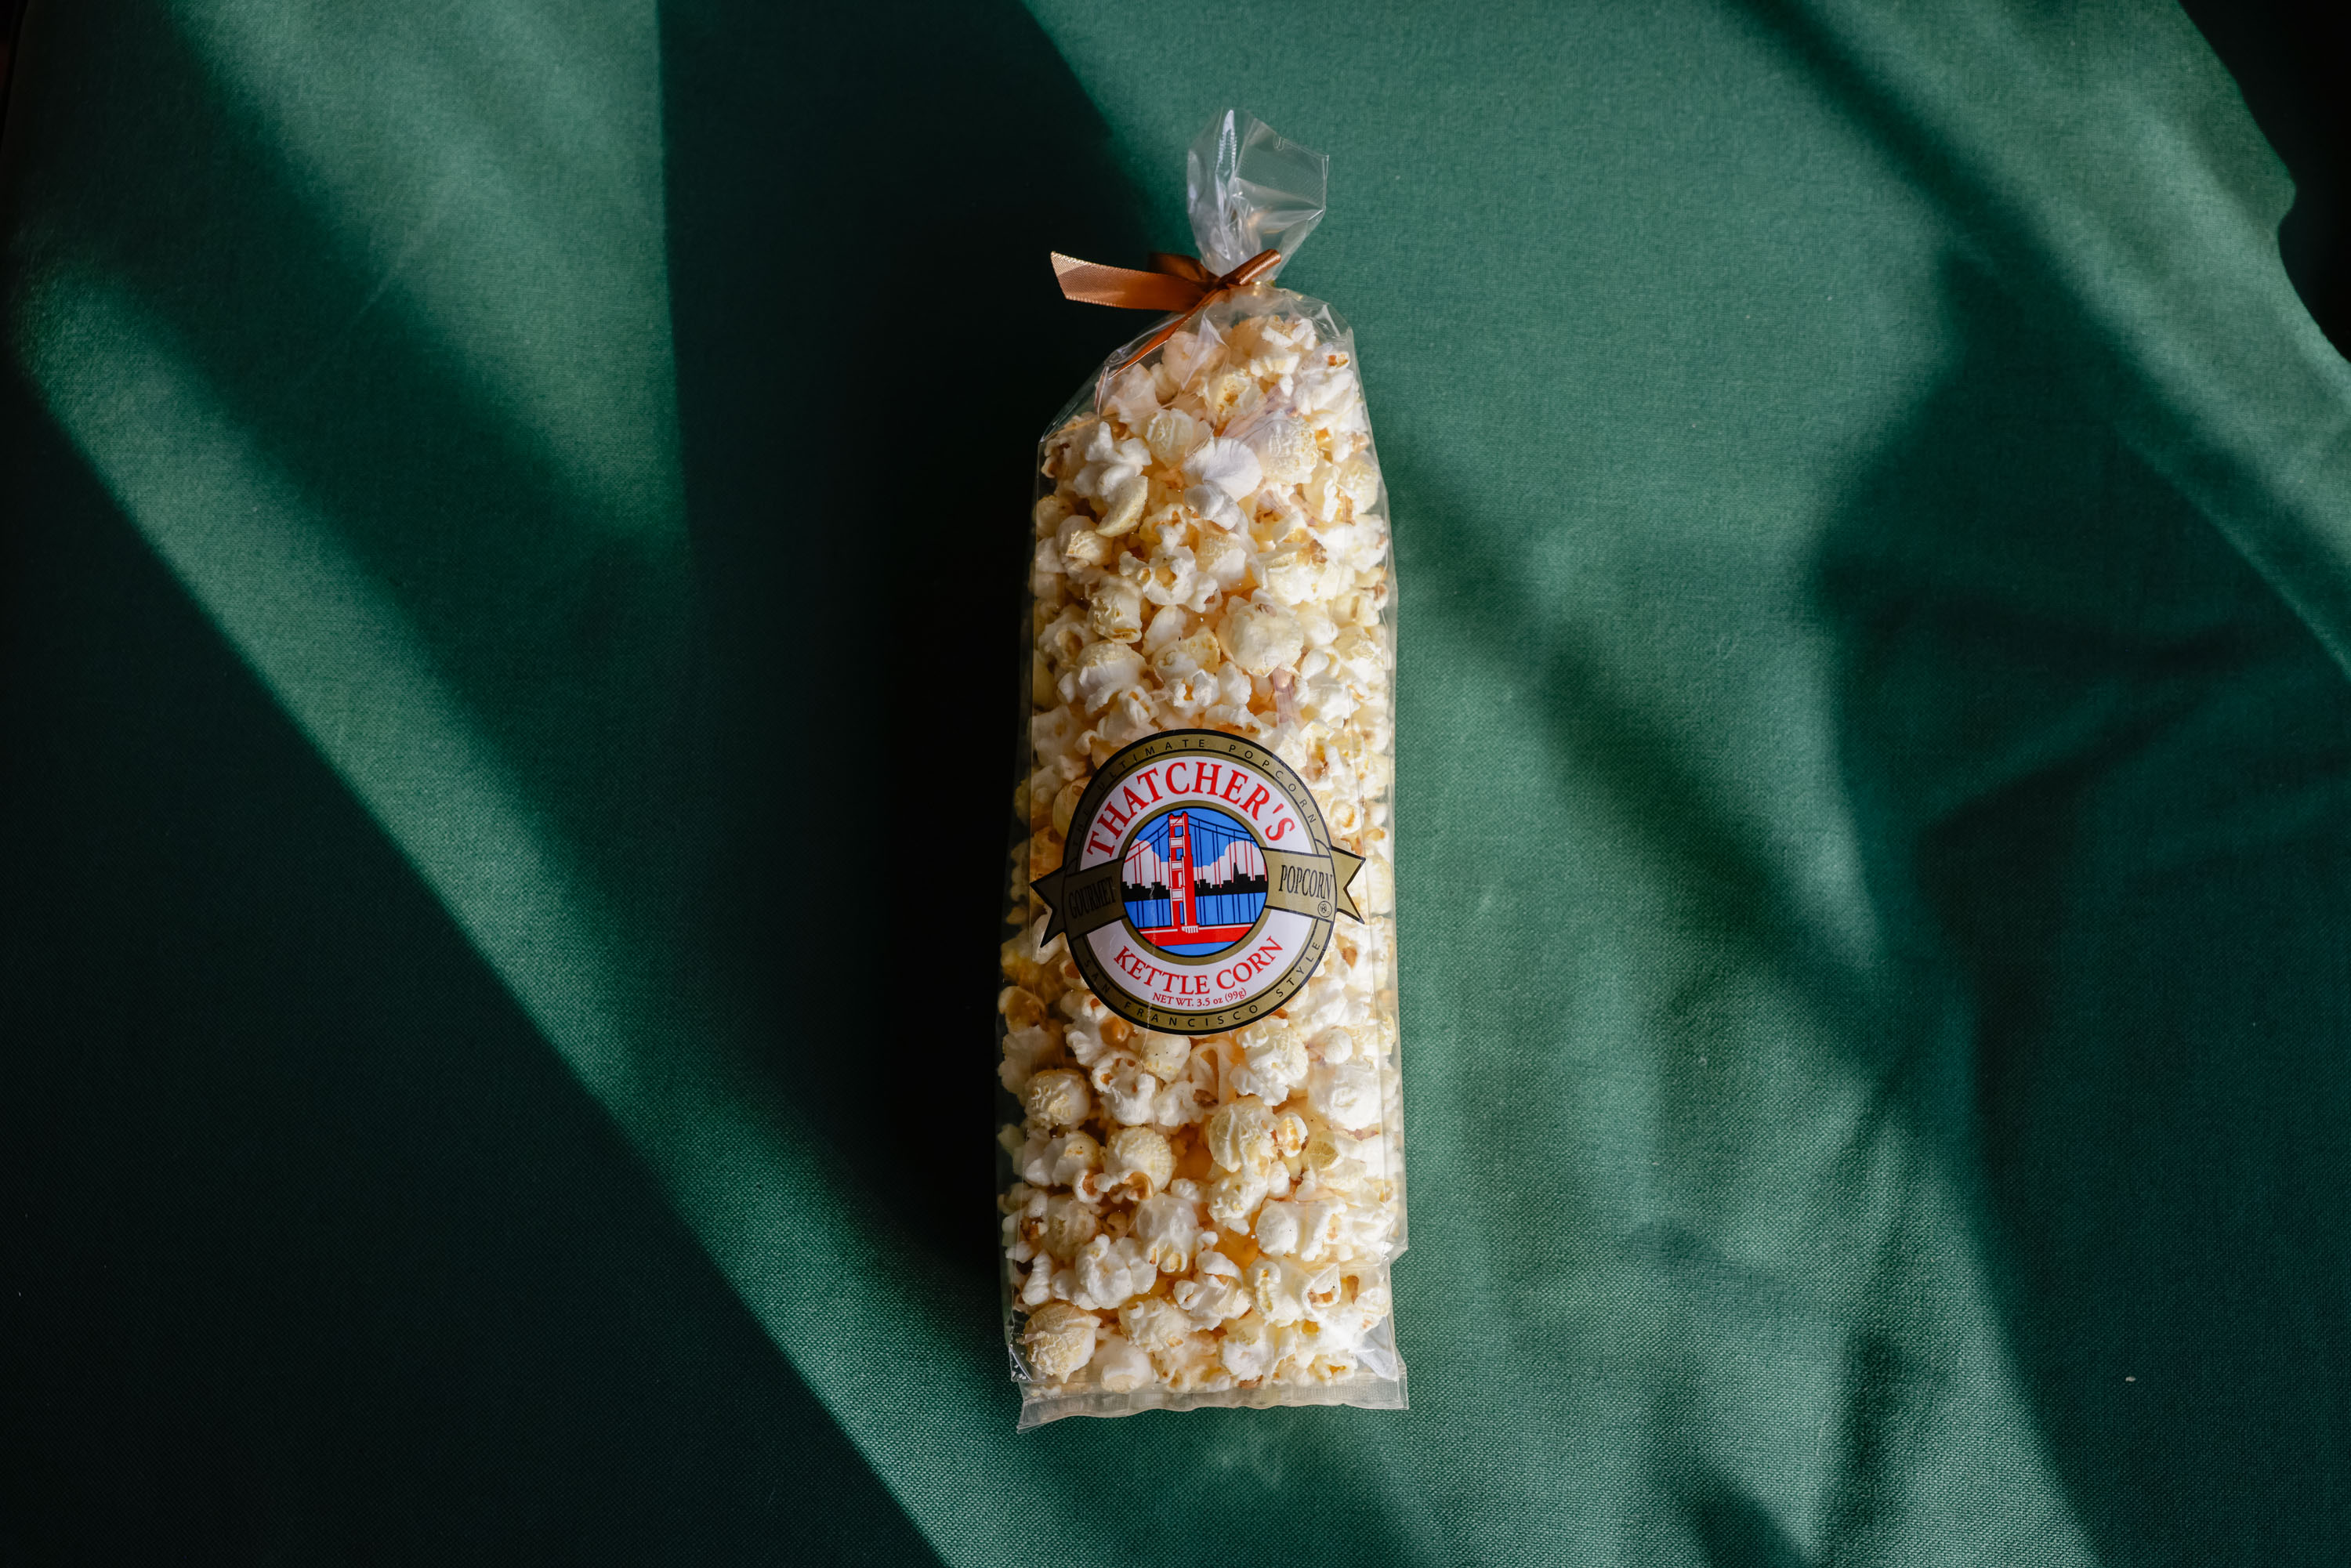 A top-down product shot of a bag of Tahtchers Kettle corn.